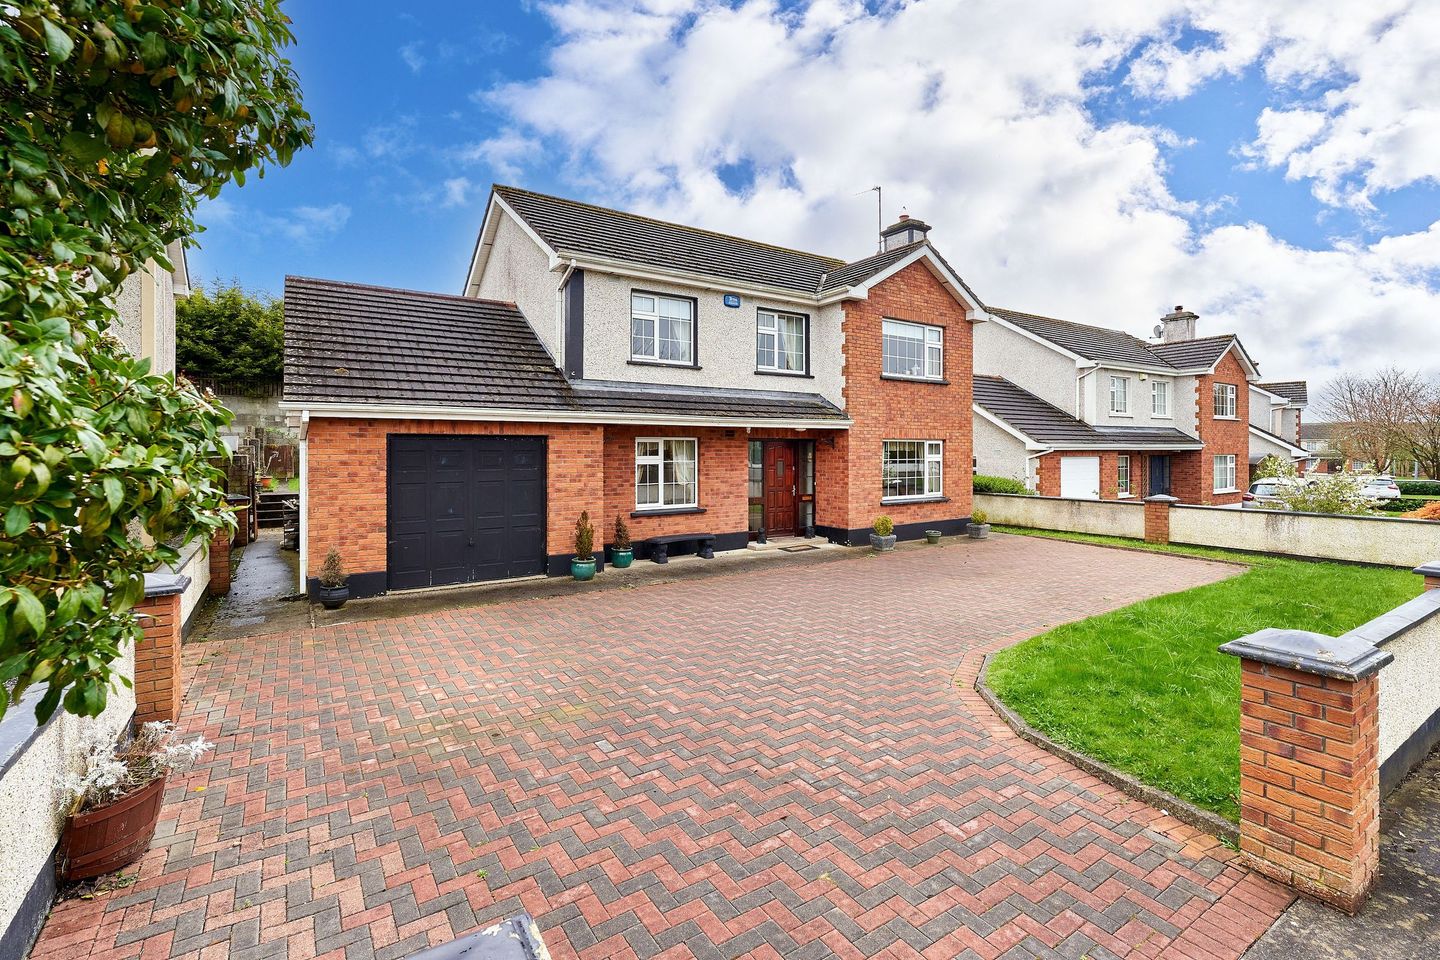 25 Meadowlands, Athboy, Co. Meath, C15RR92